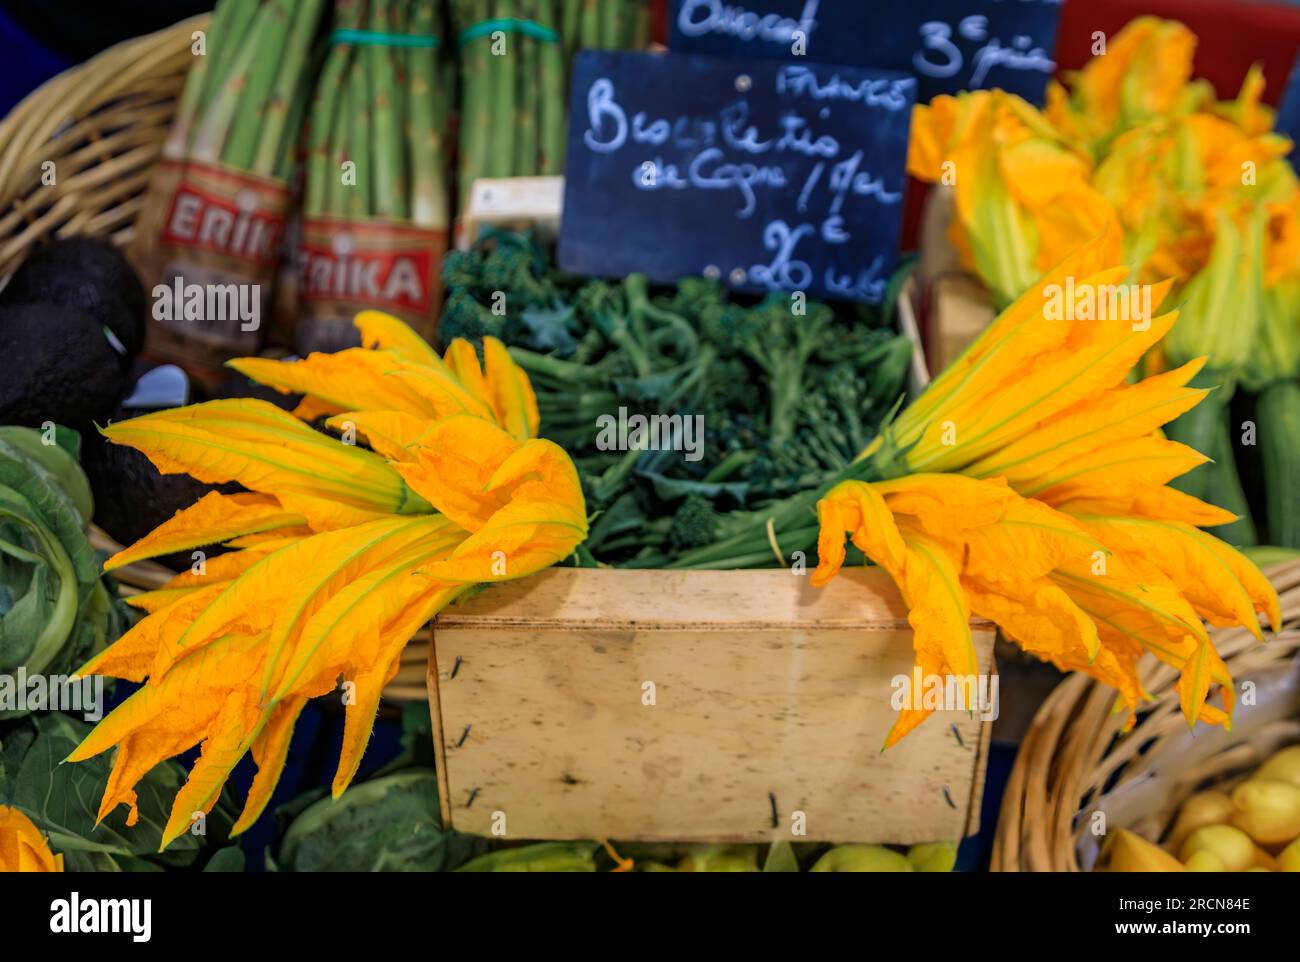 Traditional delicacy from South of France, courgette or zucchini flowers at a local provencal farmers market in Vieil Antibes, South of France Stock Photo